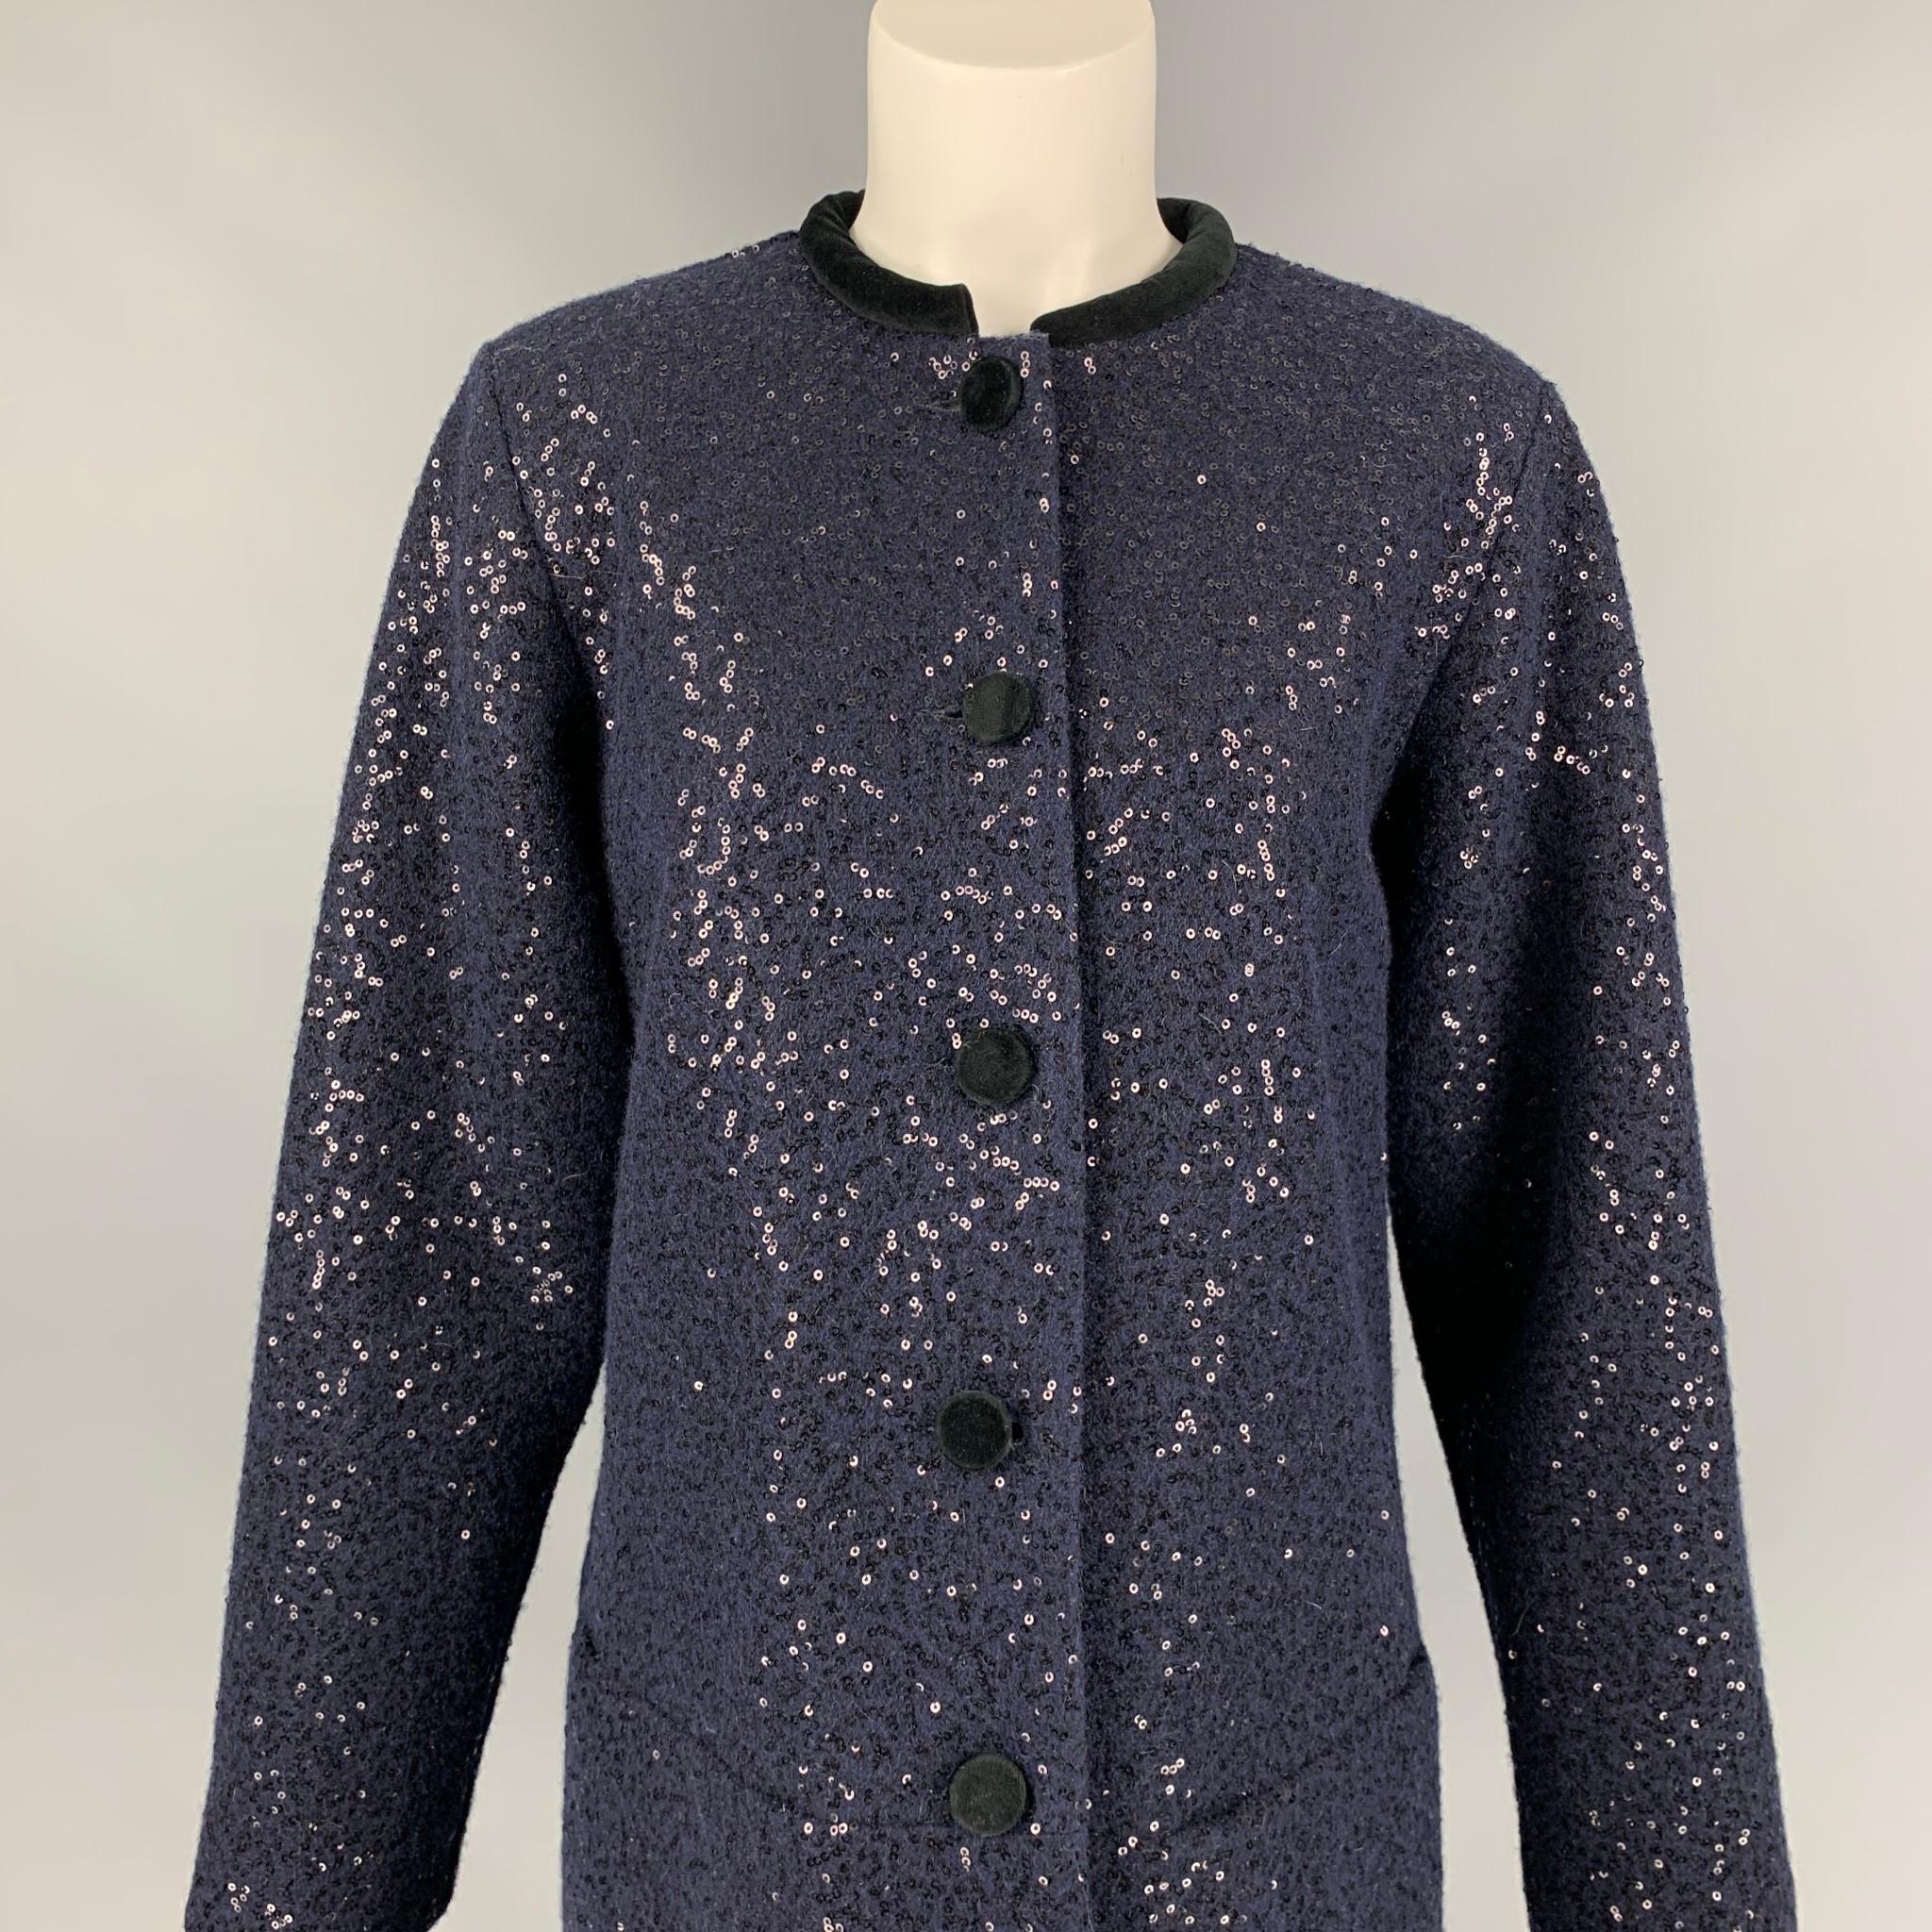 AGNES B. coat comes in a navy sequined material with a full liner featuring a collarless style, velvet trim, and a buttoned closure. Made in Romania. 

Good Pre-Owned Condition. Fabric tag removed.
Marked: 3

Measurements:

Shoulder: 16 in.
Bust: 38